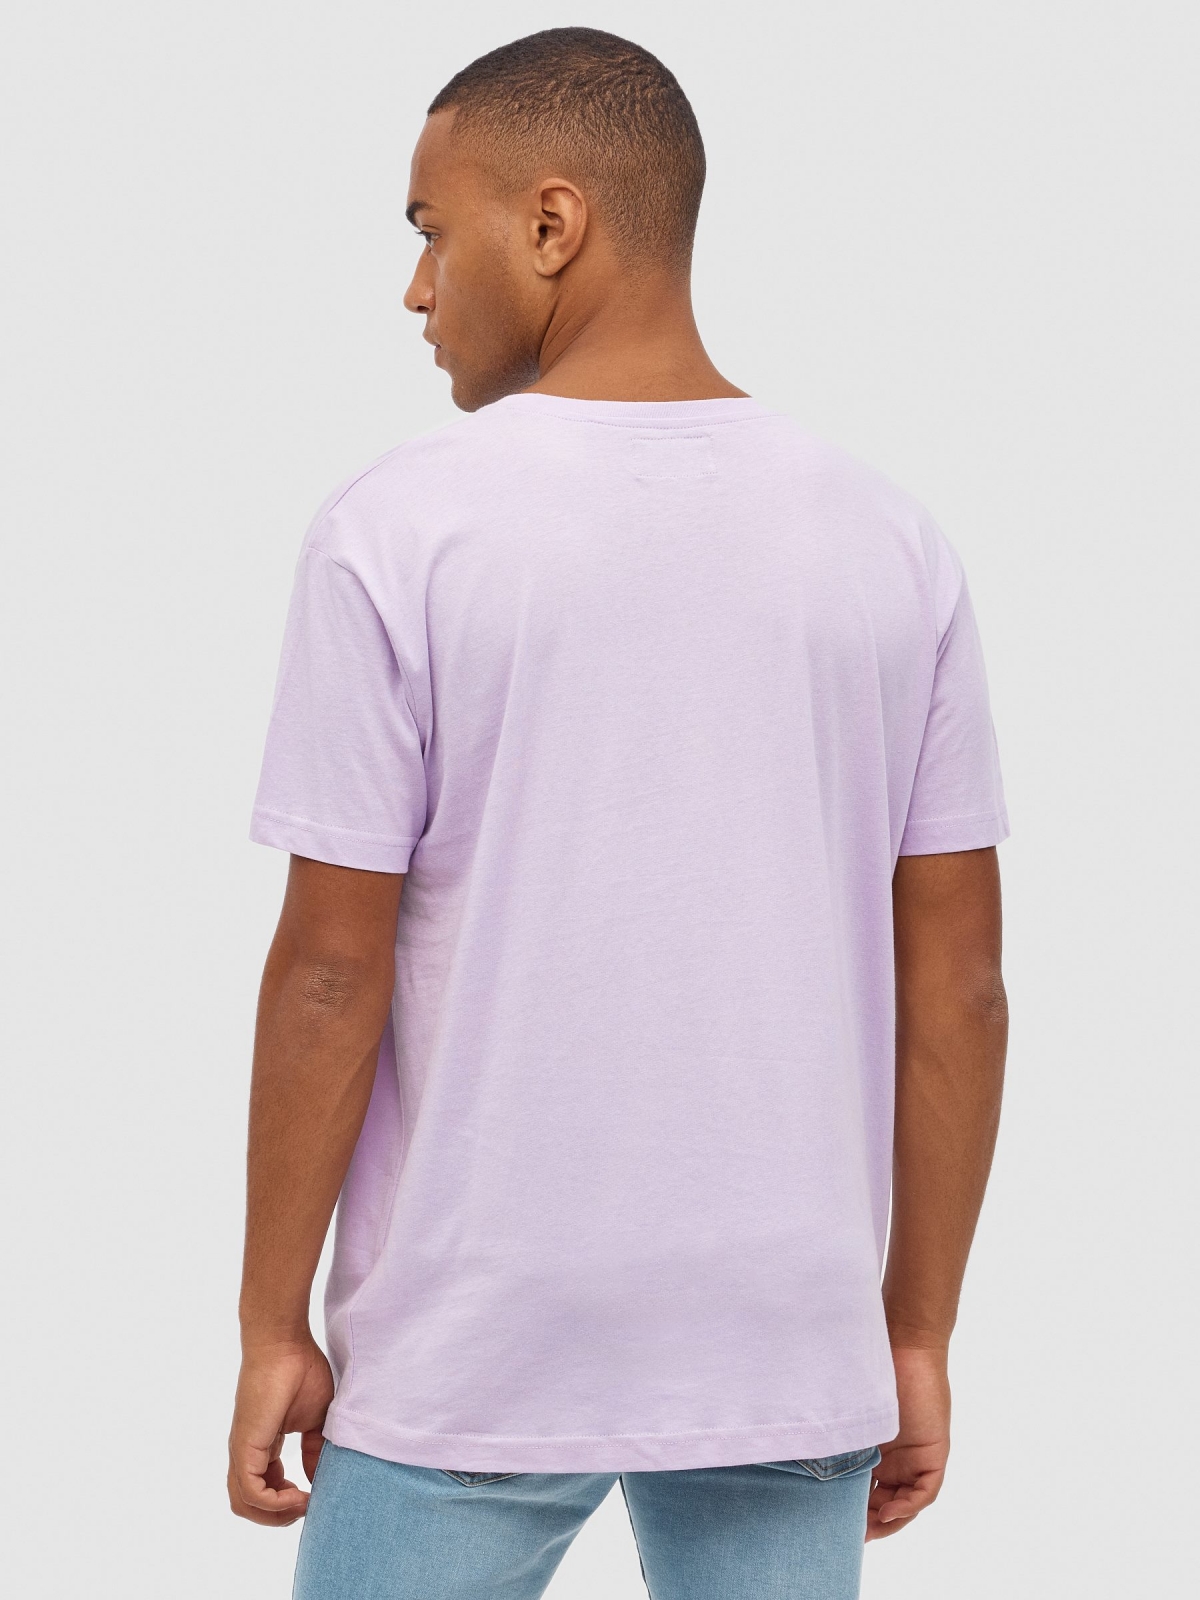 INSIDE spray T-shirt purple middle back view